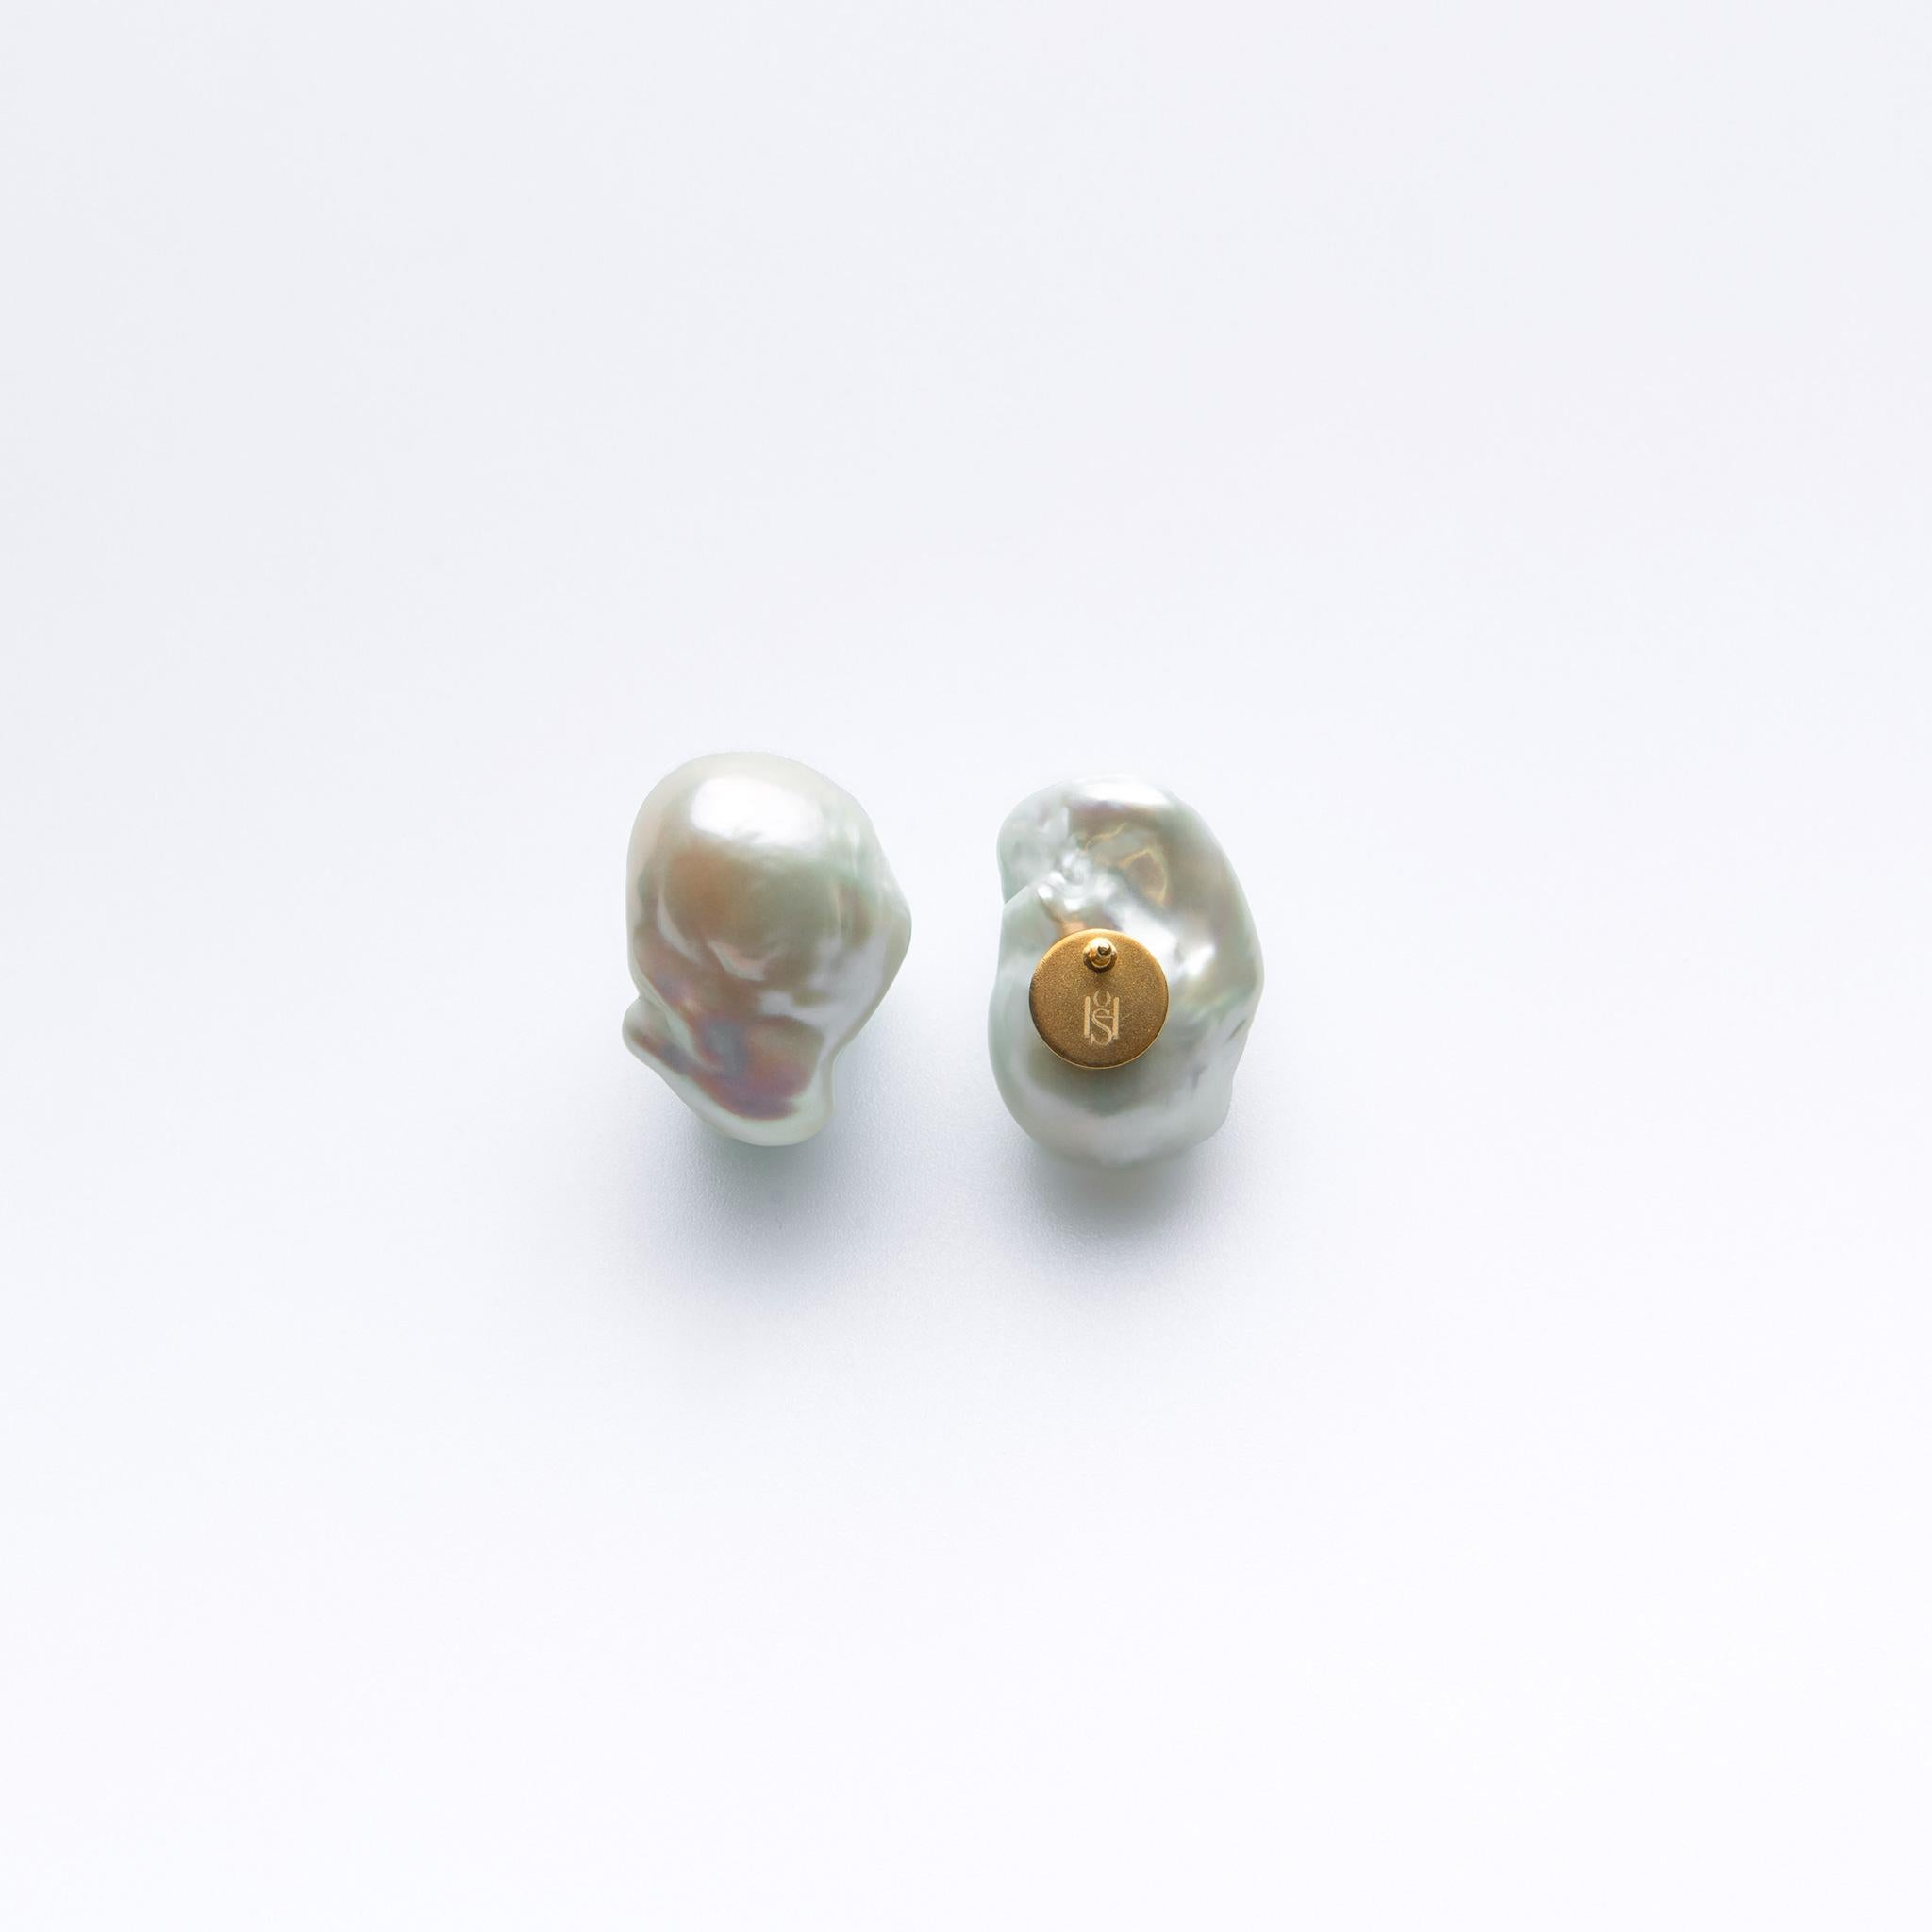 -Crafted with 24K gold-filled 925 sterling silver paired with genuine Baroque pearls
- Made to order within two weeks, ensuring that each set of earrings is unique, just like the individual pearls used.
- Dimensions of each earring range between